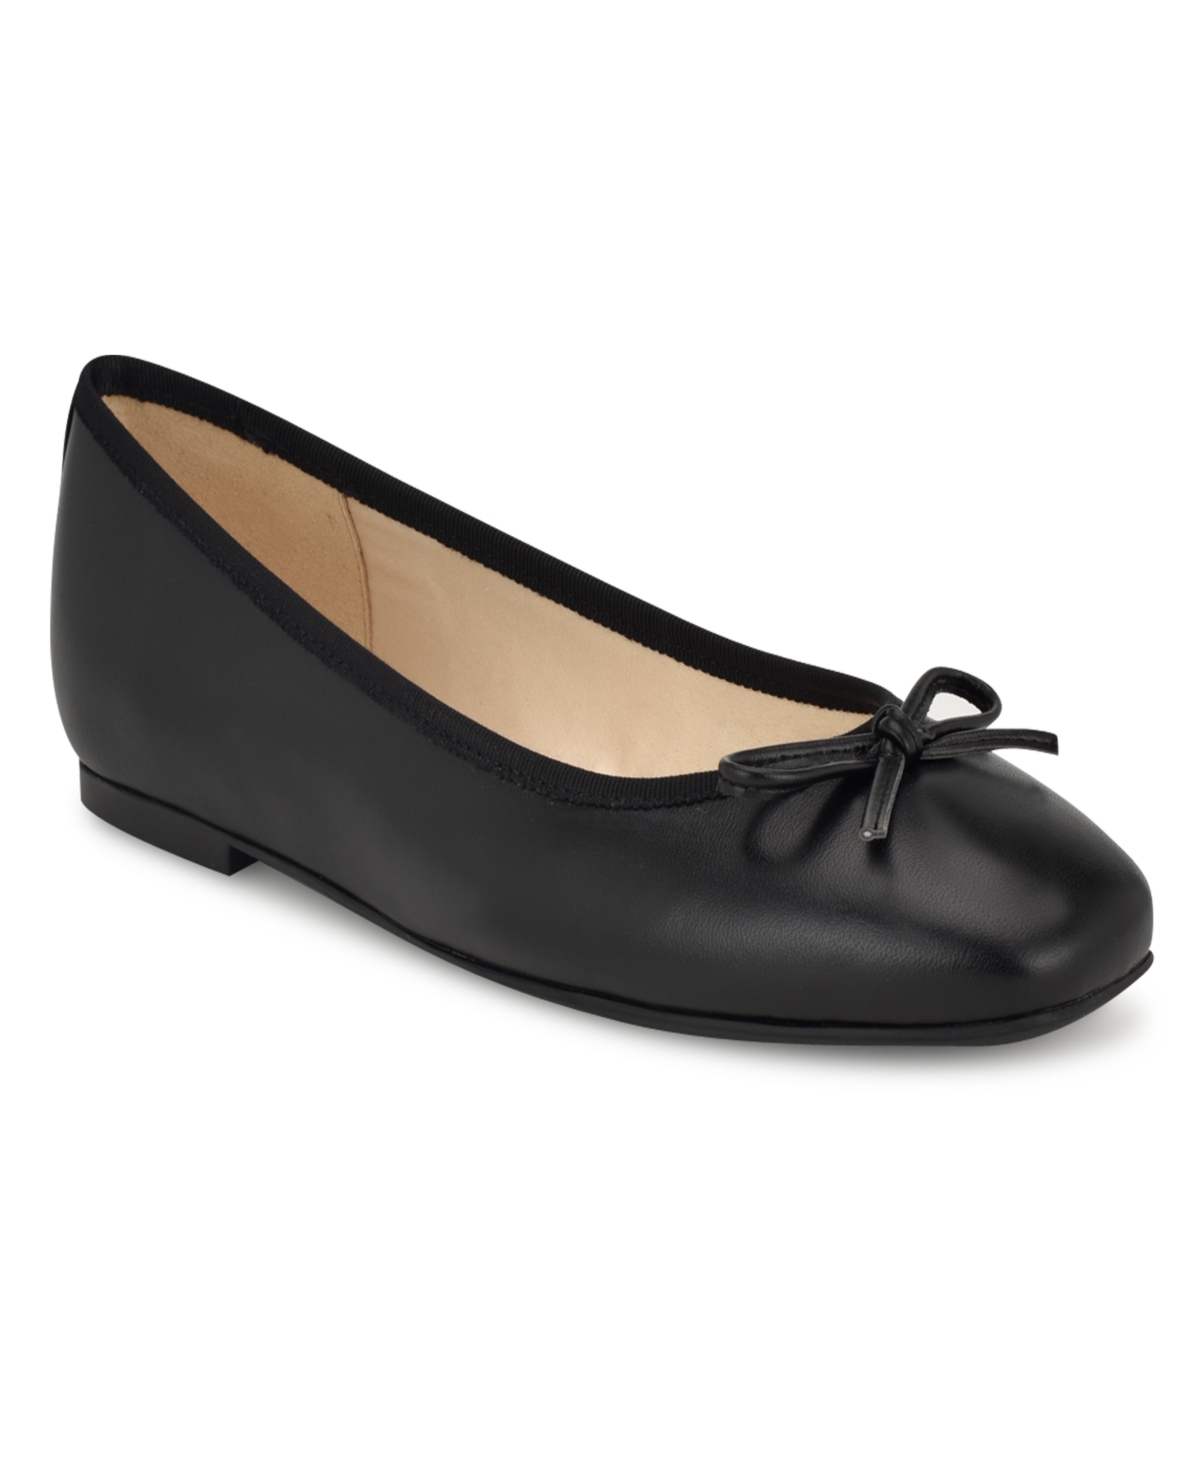 Nine West Women's Tootsy Square Toe Slip-on Ballet Dress Flats In Black - Faux Leather